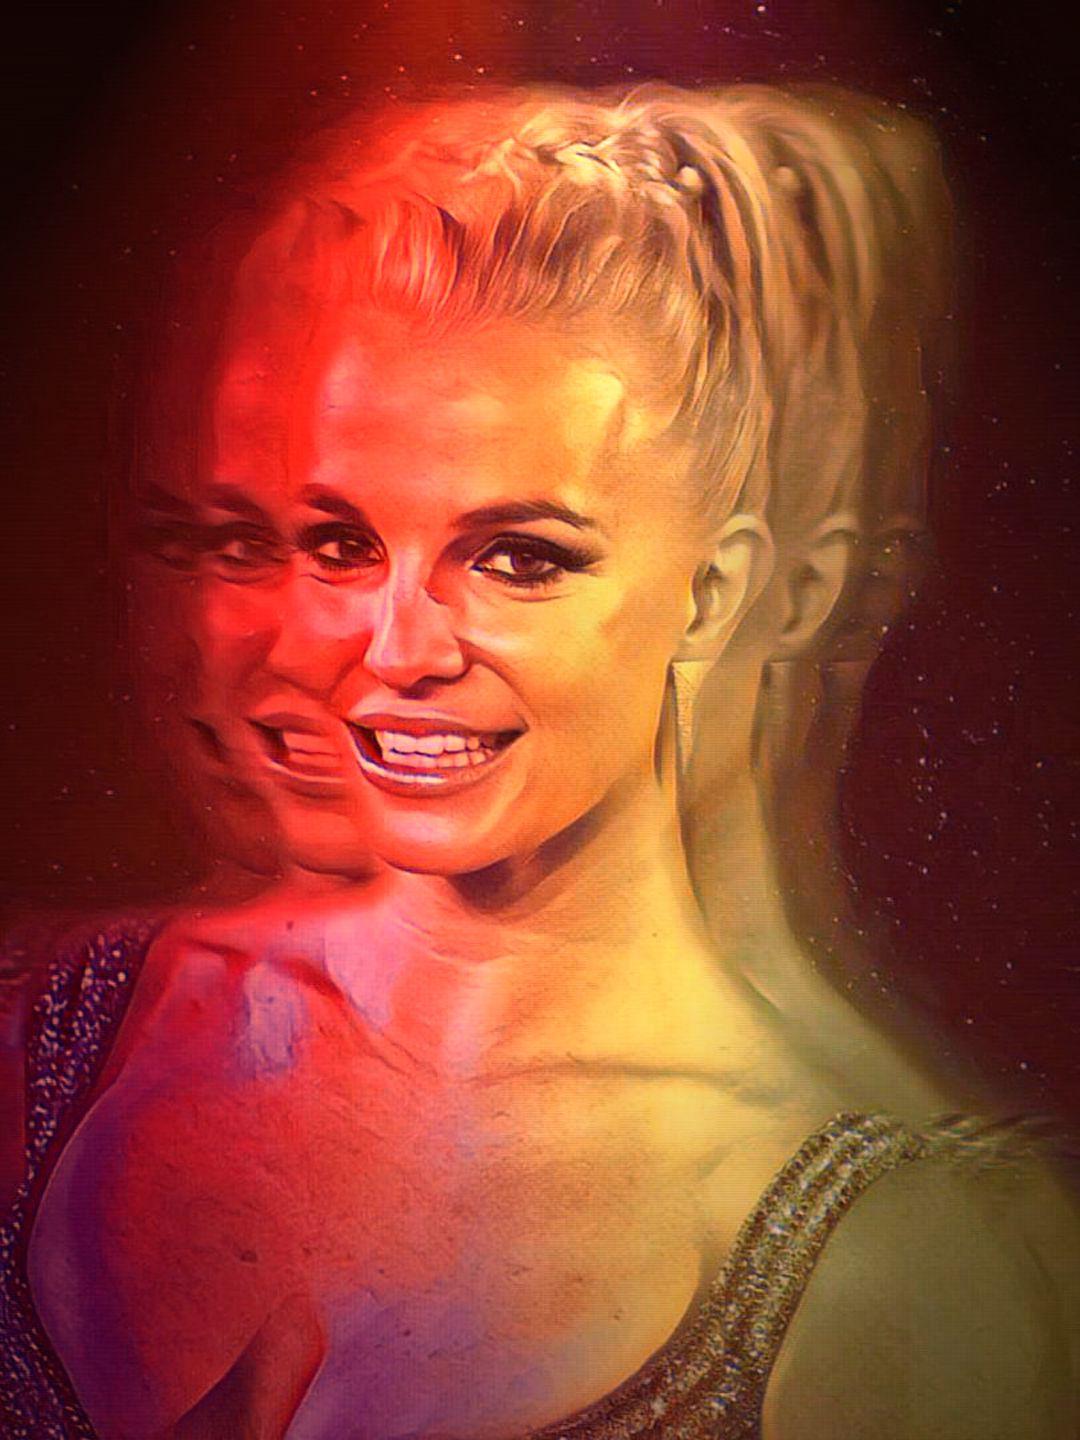 Amateur Blonde Teen Big Tits Fucked - Britney Spears # 3 - Celeb ART - Beautiful Artworks of Celebrities,  Footballers, Politicians and Famous People in World | OpenSea